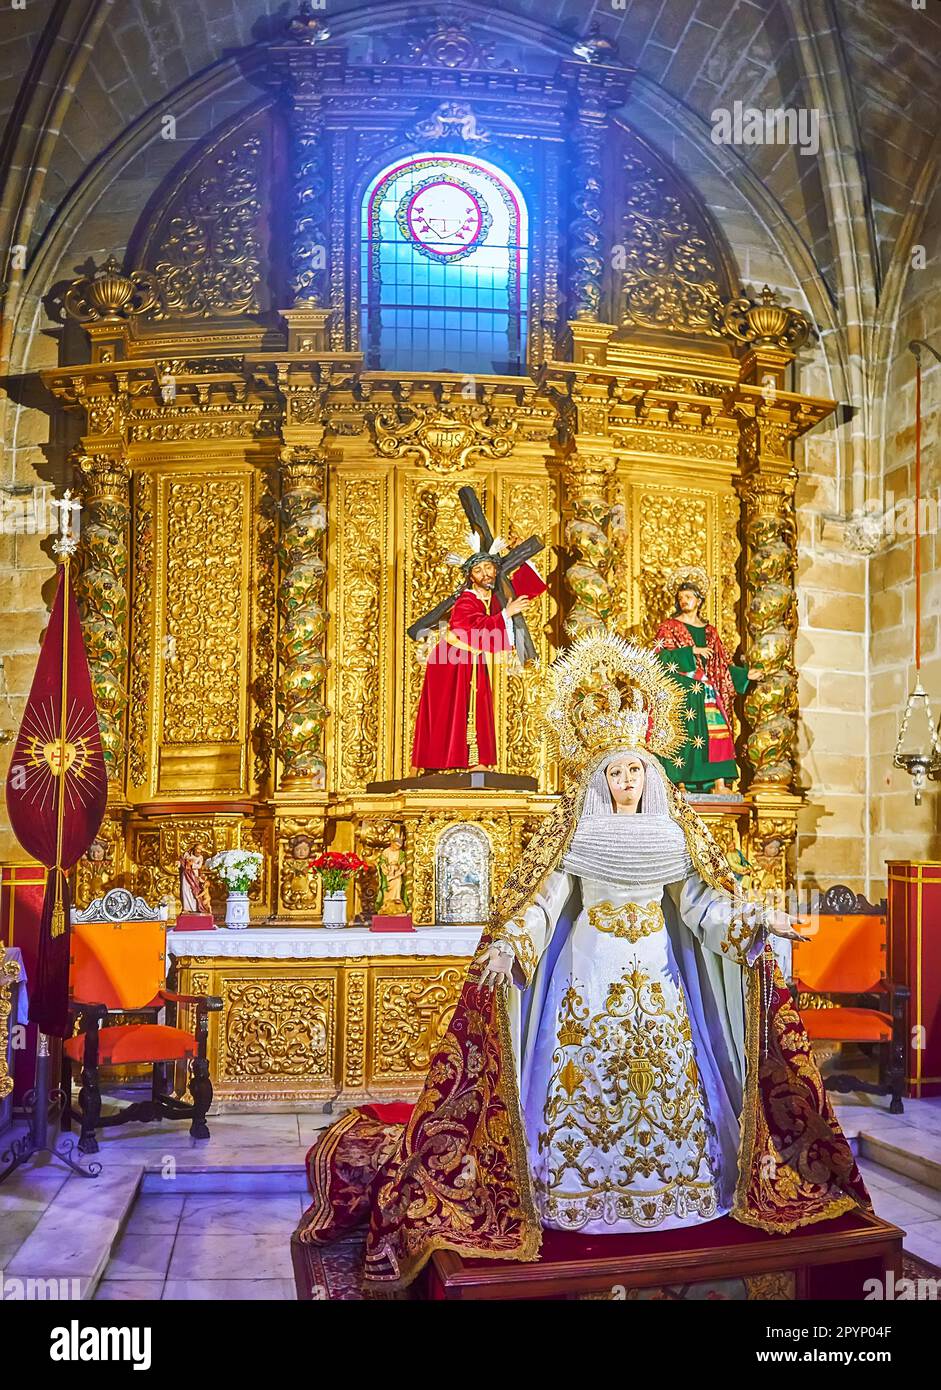 EL PUERTO, SPAIN - SEPT 21, 2019: The statue of Virgin Mary in ornate chapel of Great Priory Church, decorated with carved gilt altarpiece, on Sept 21 Stock Photo